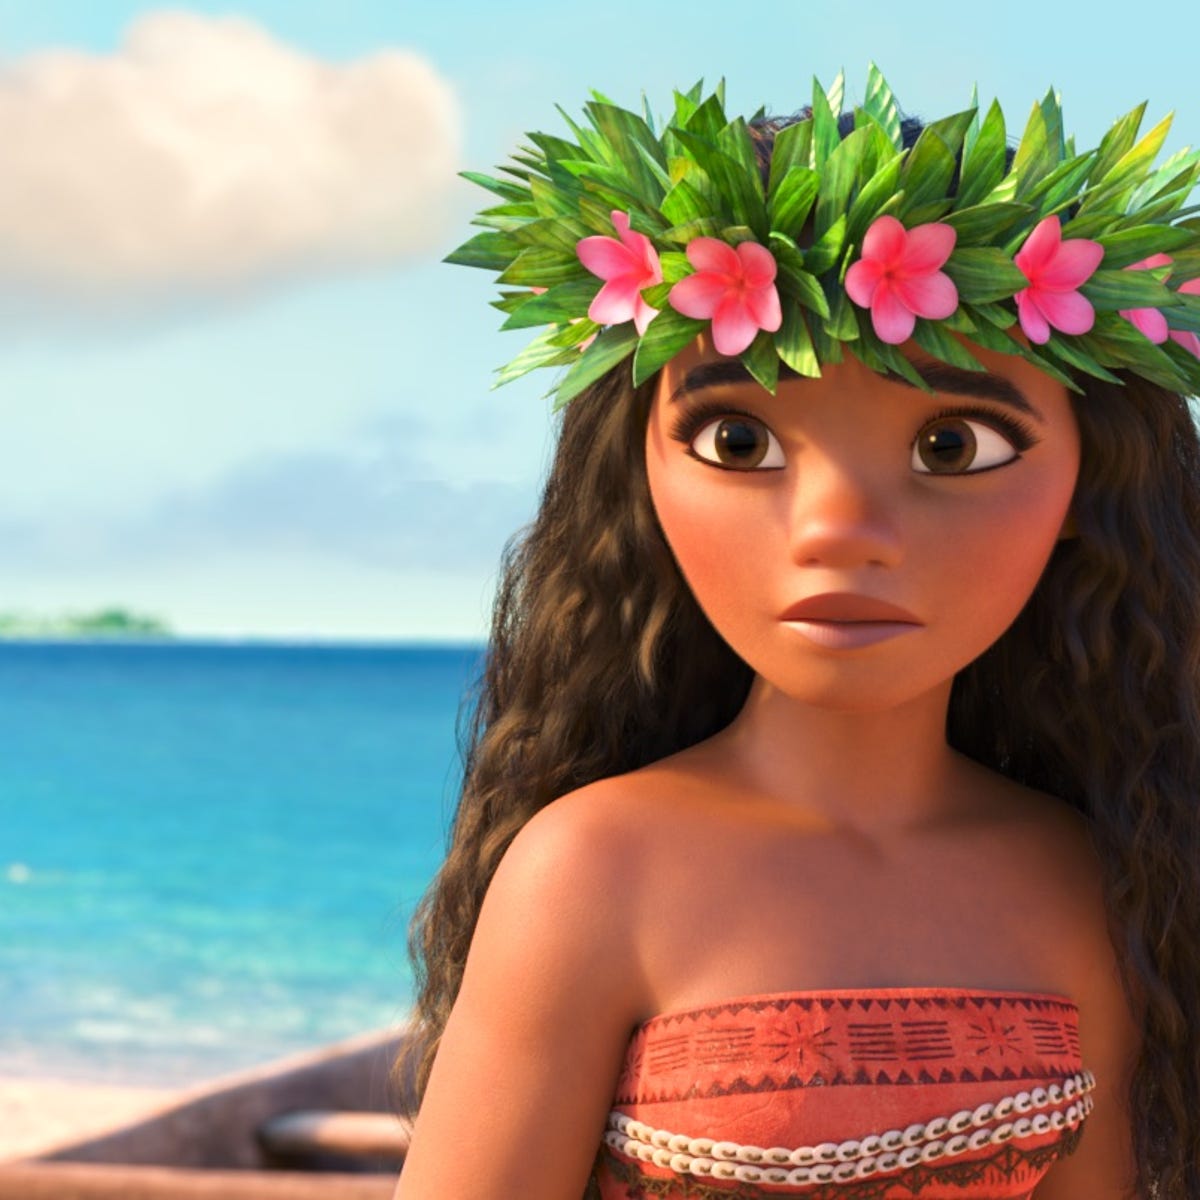 Making 'Moana': The special effects behind the movie - CNET